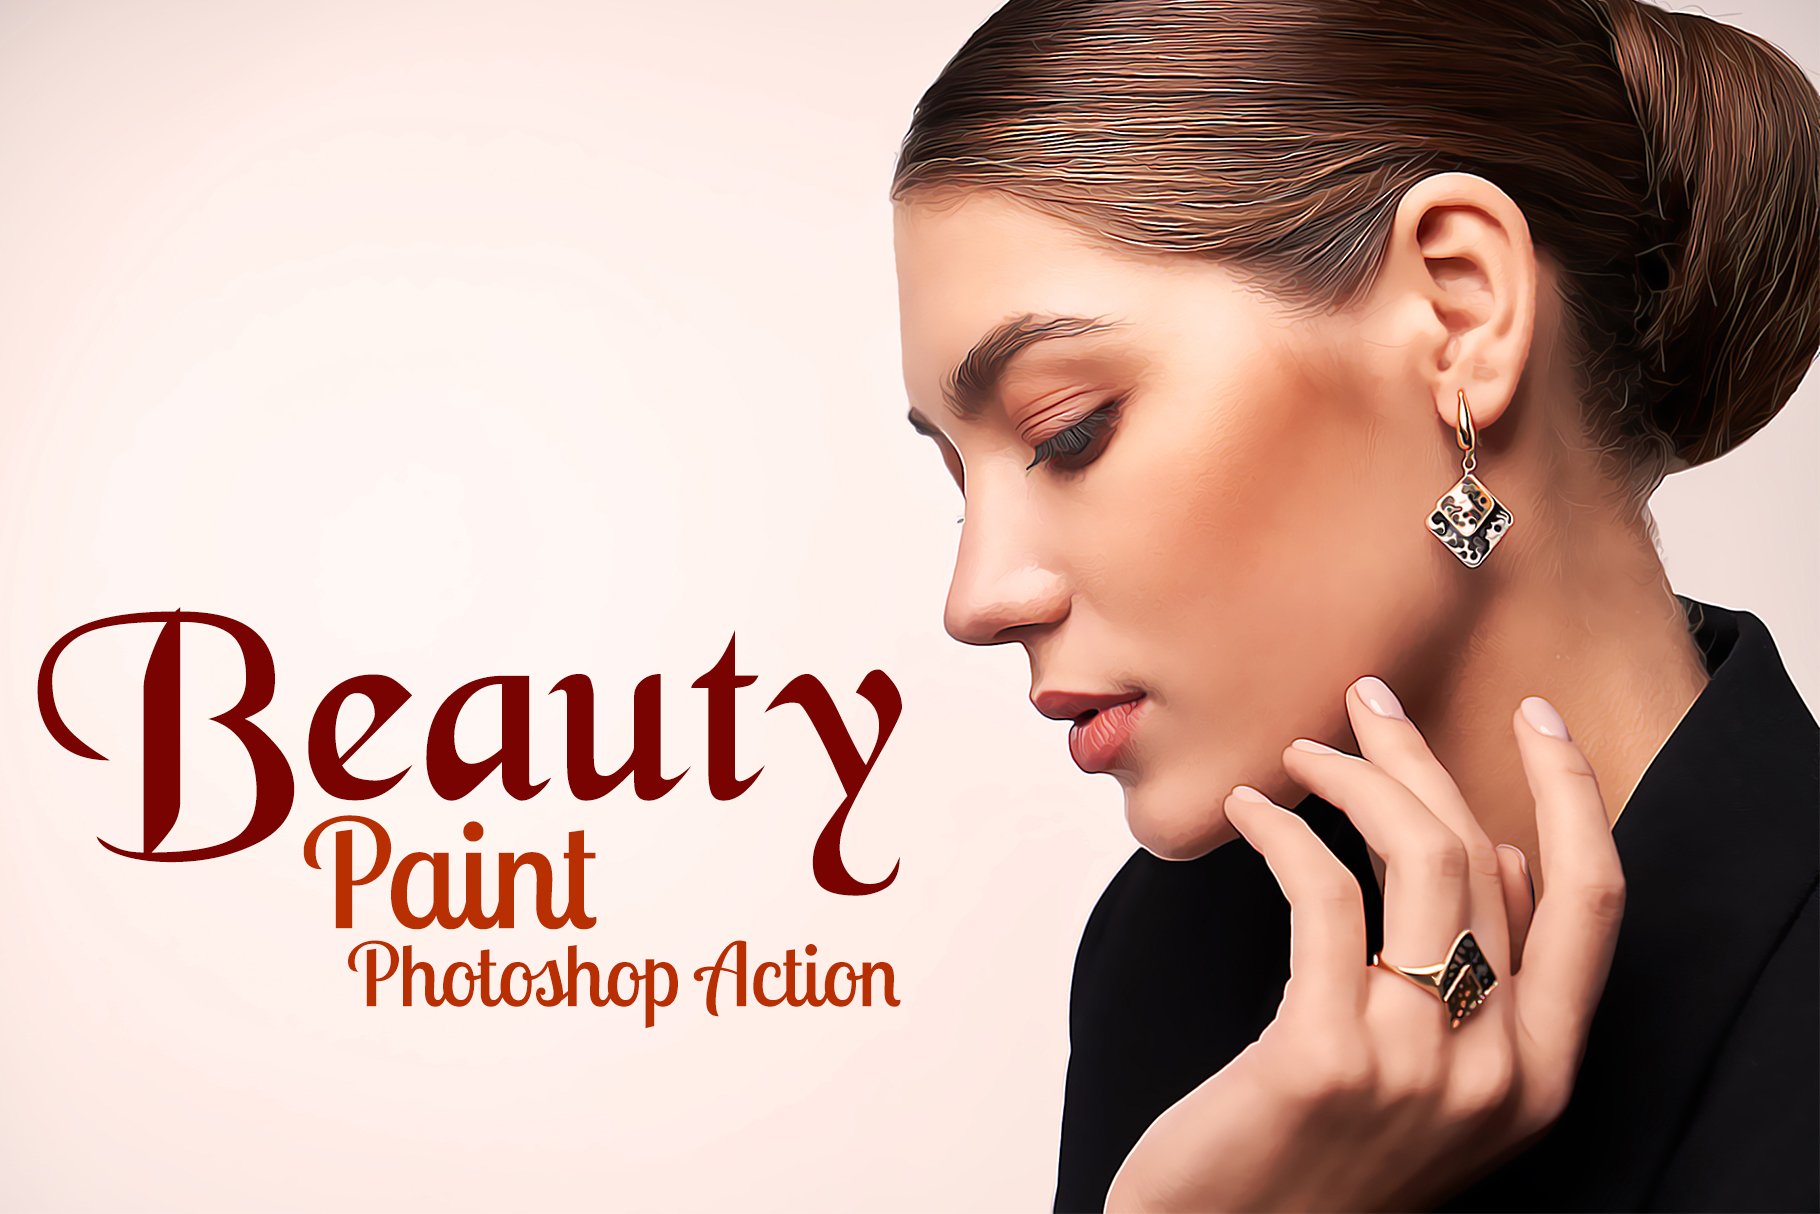 Beauty Paint Photoshop Actioncover image.